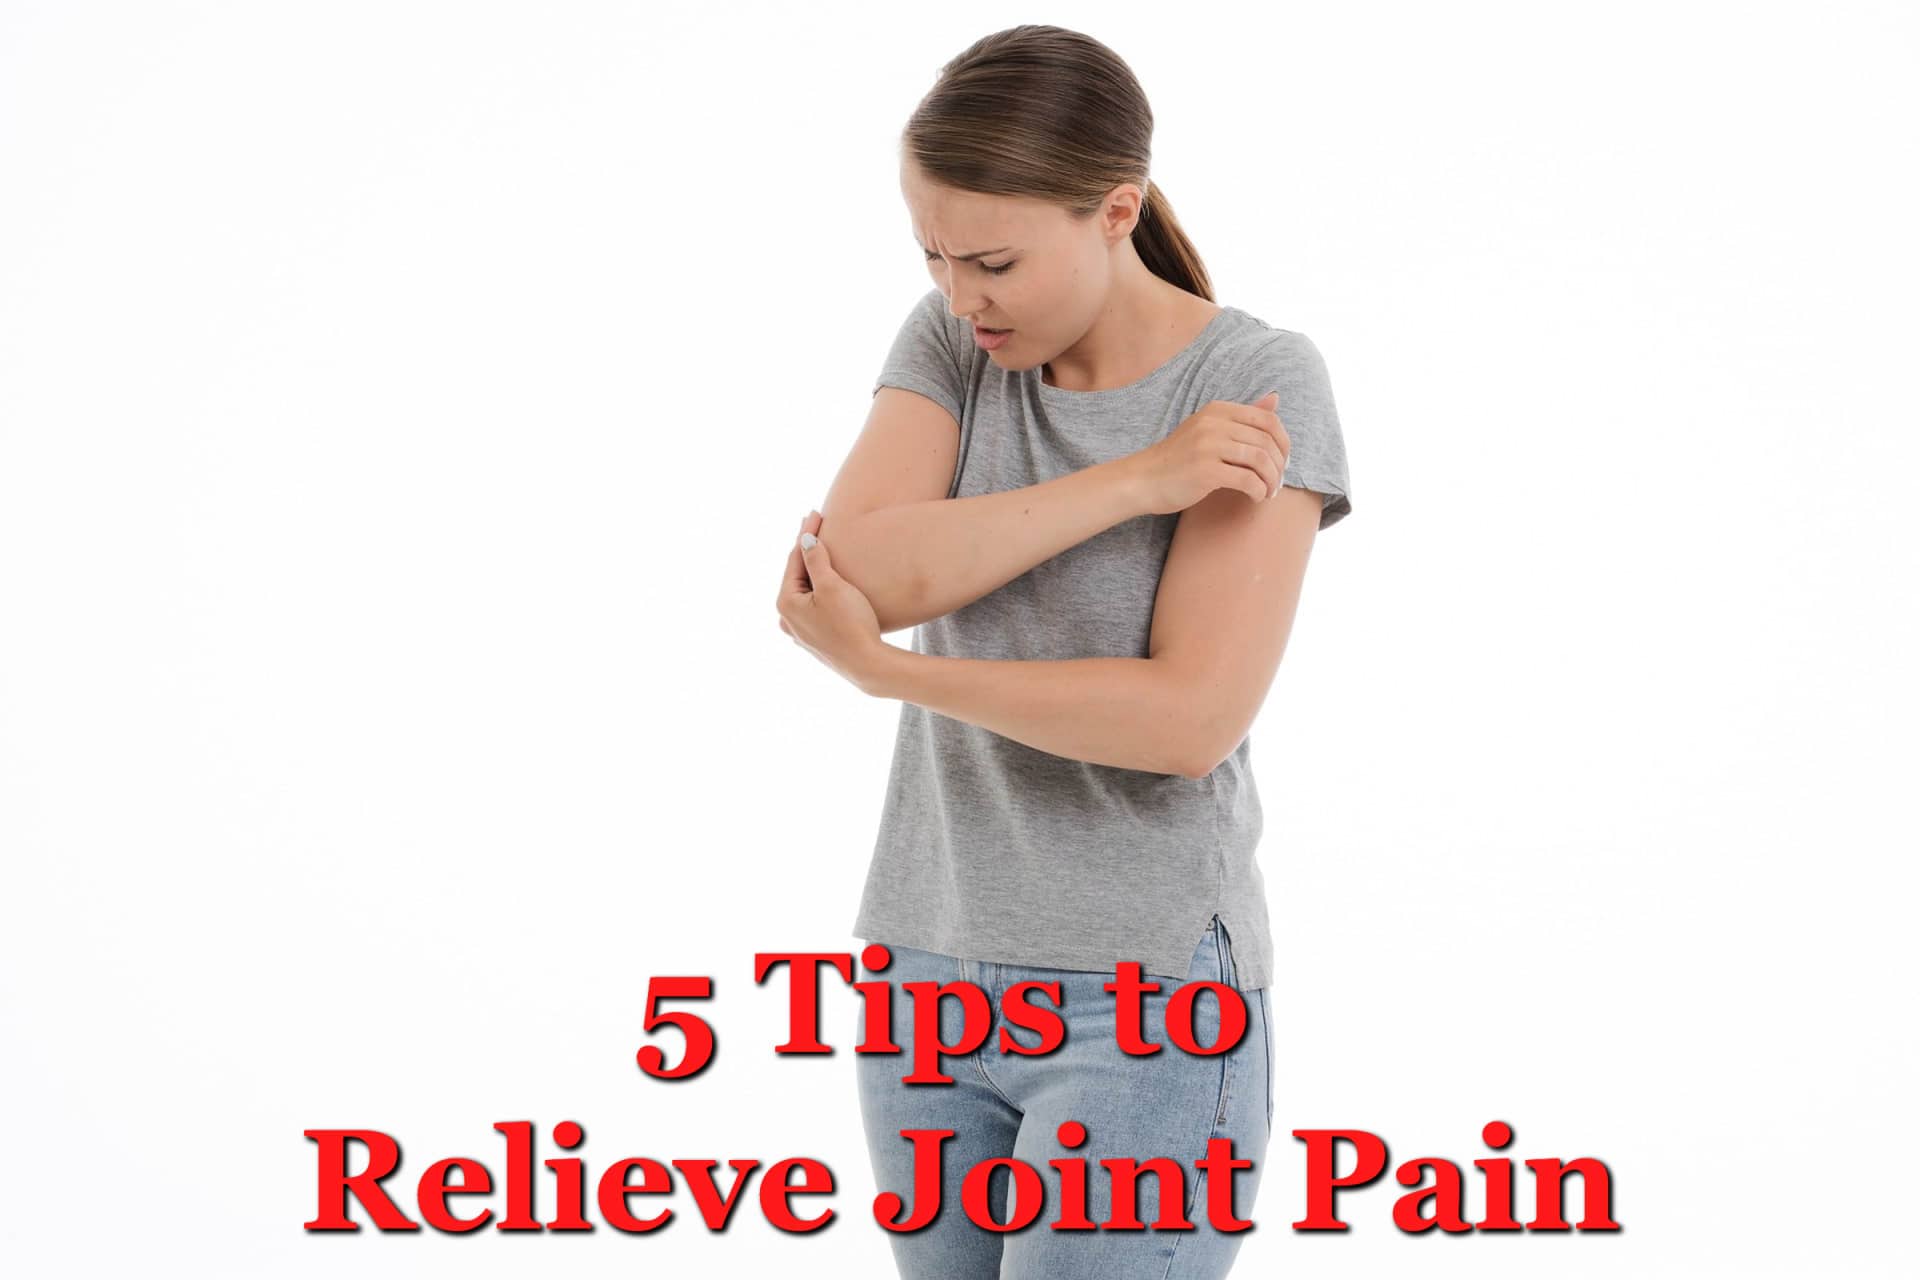 5 Tips to Relieve Joint Pain